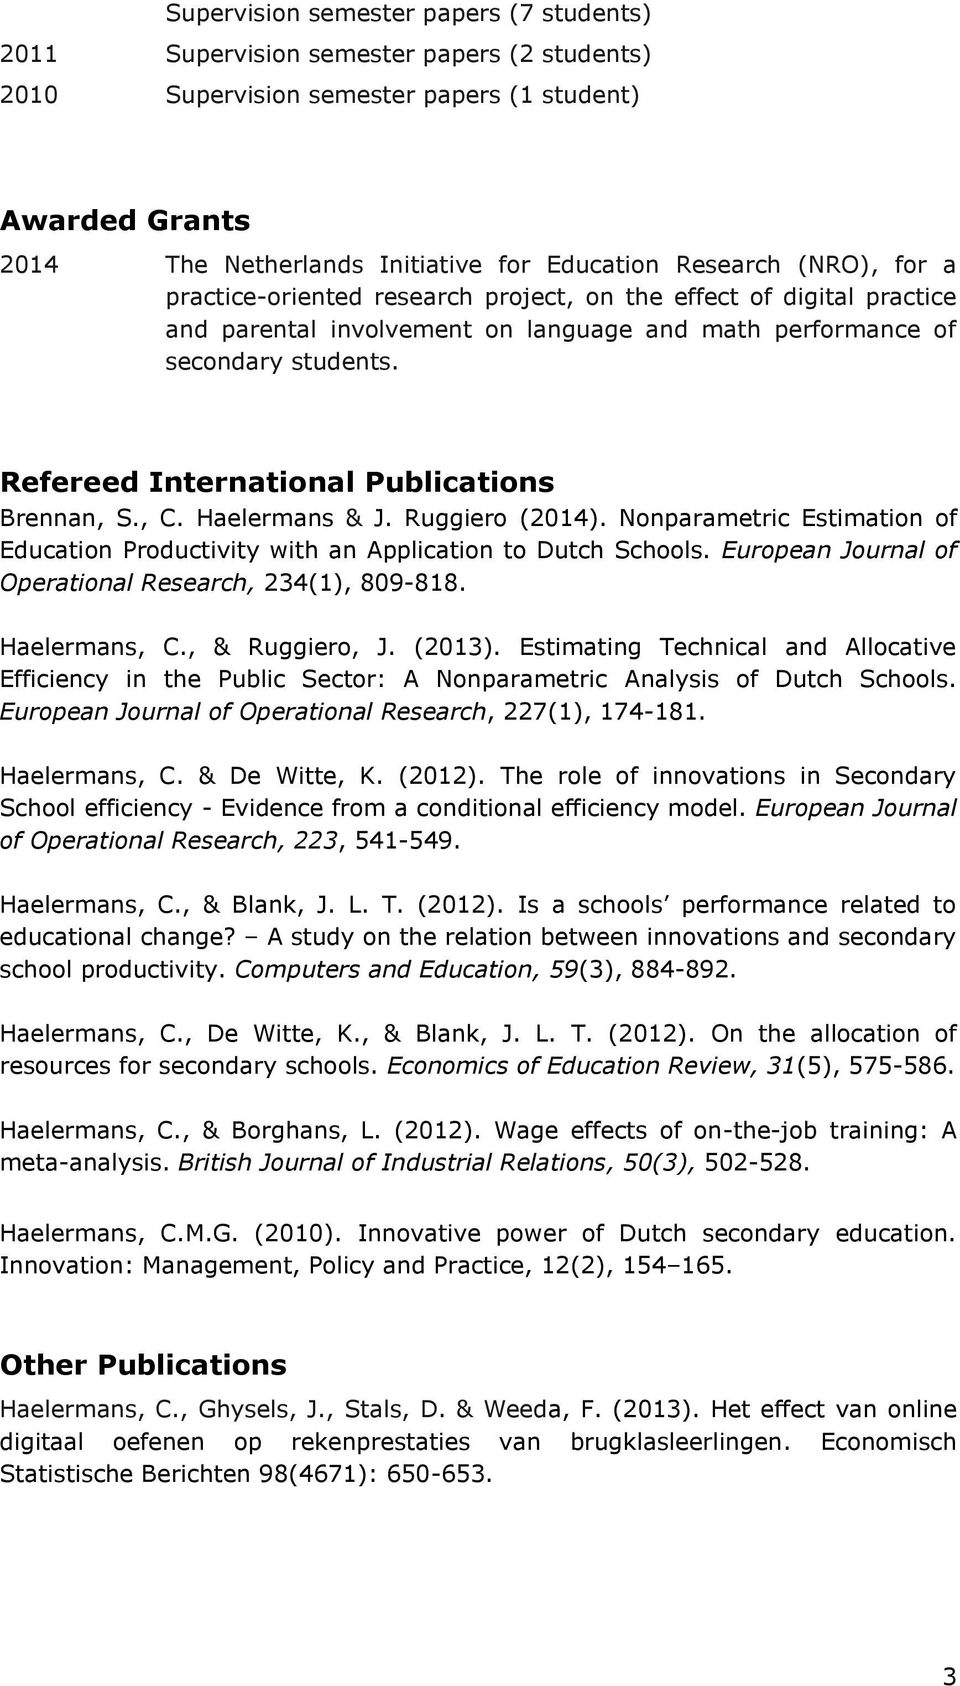 Refereed International Publications Brennan, S., C. Haelermans & J. Ruggiero (2014). Nonparametric Estimation of Education Productivity with an Application to Dutch Schools.